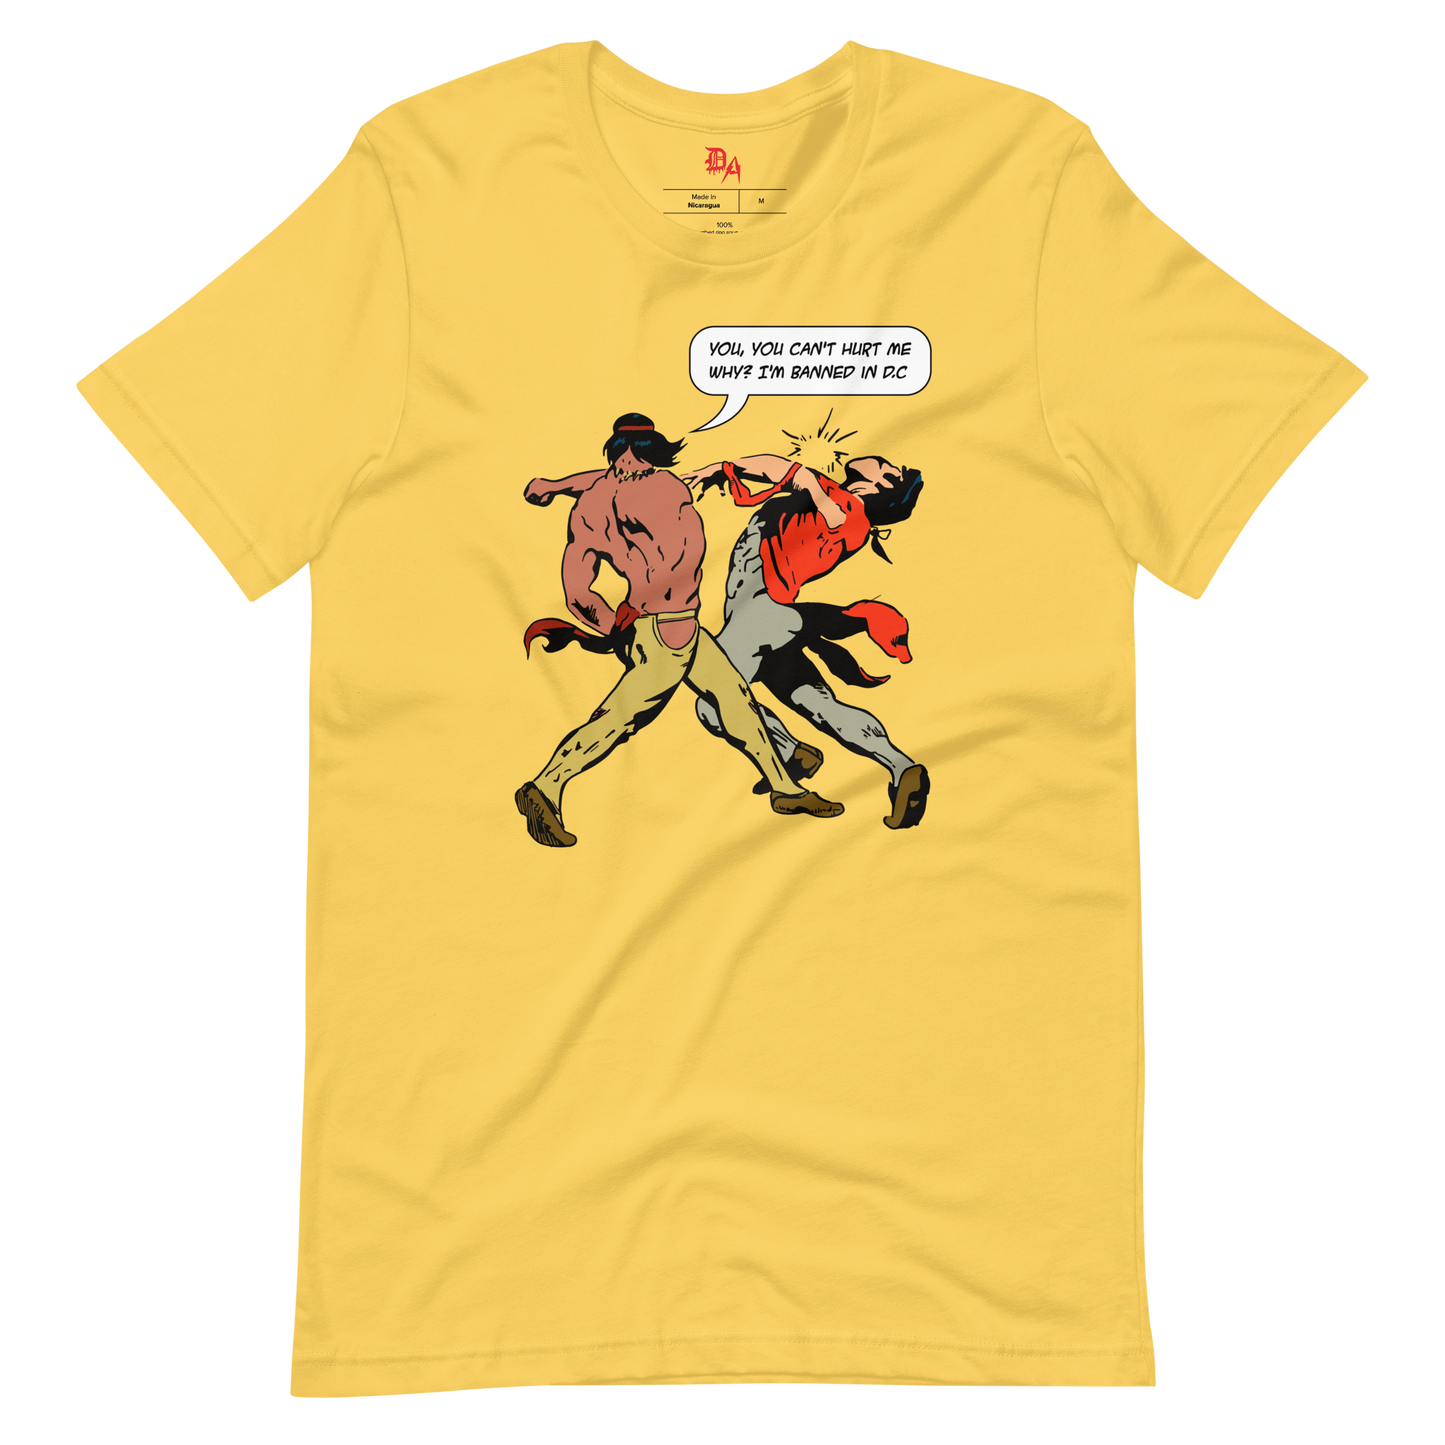 Gregg Deal "Banned in DC" T-Shirt